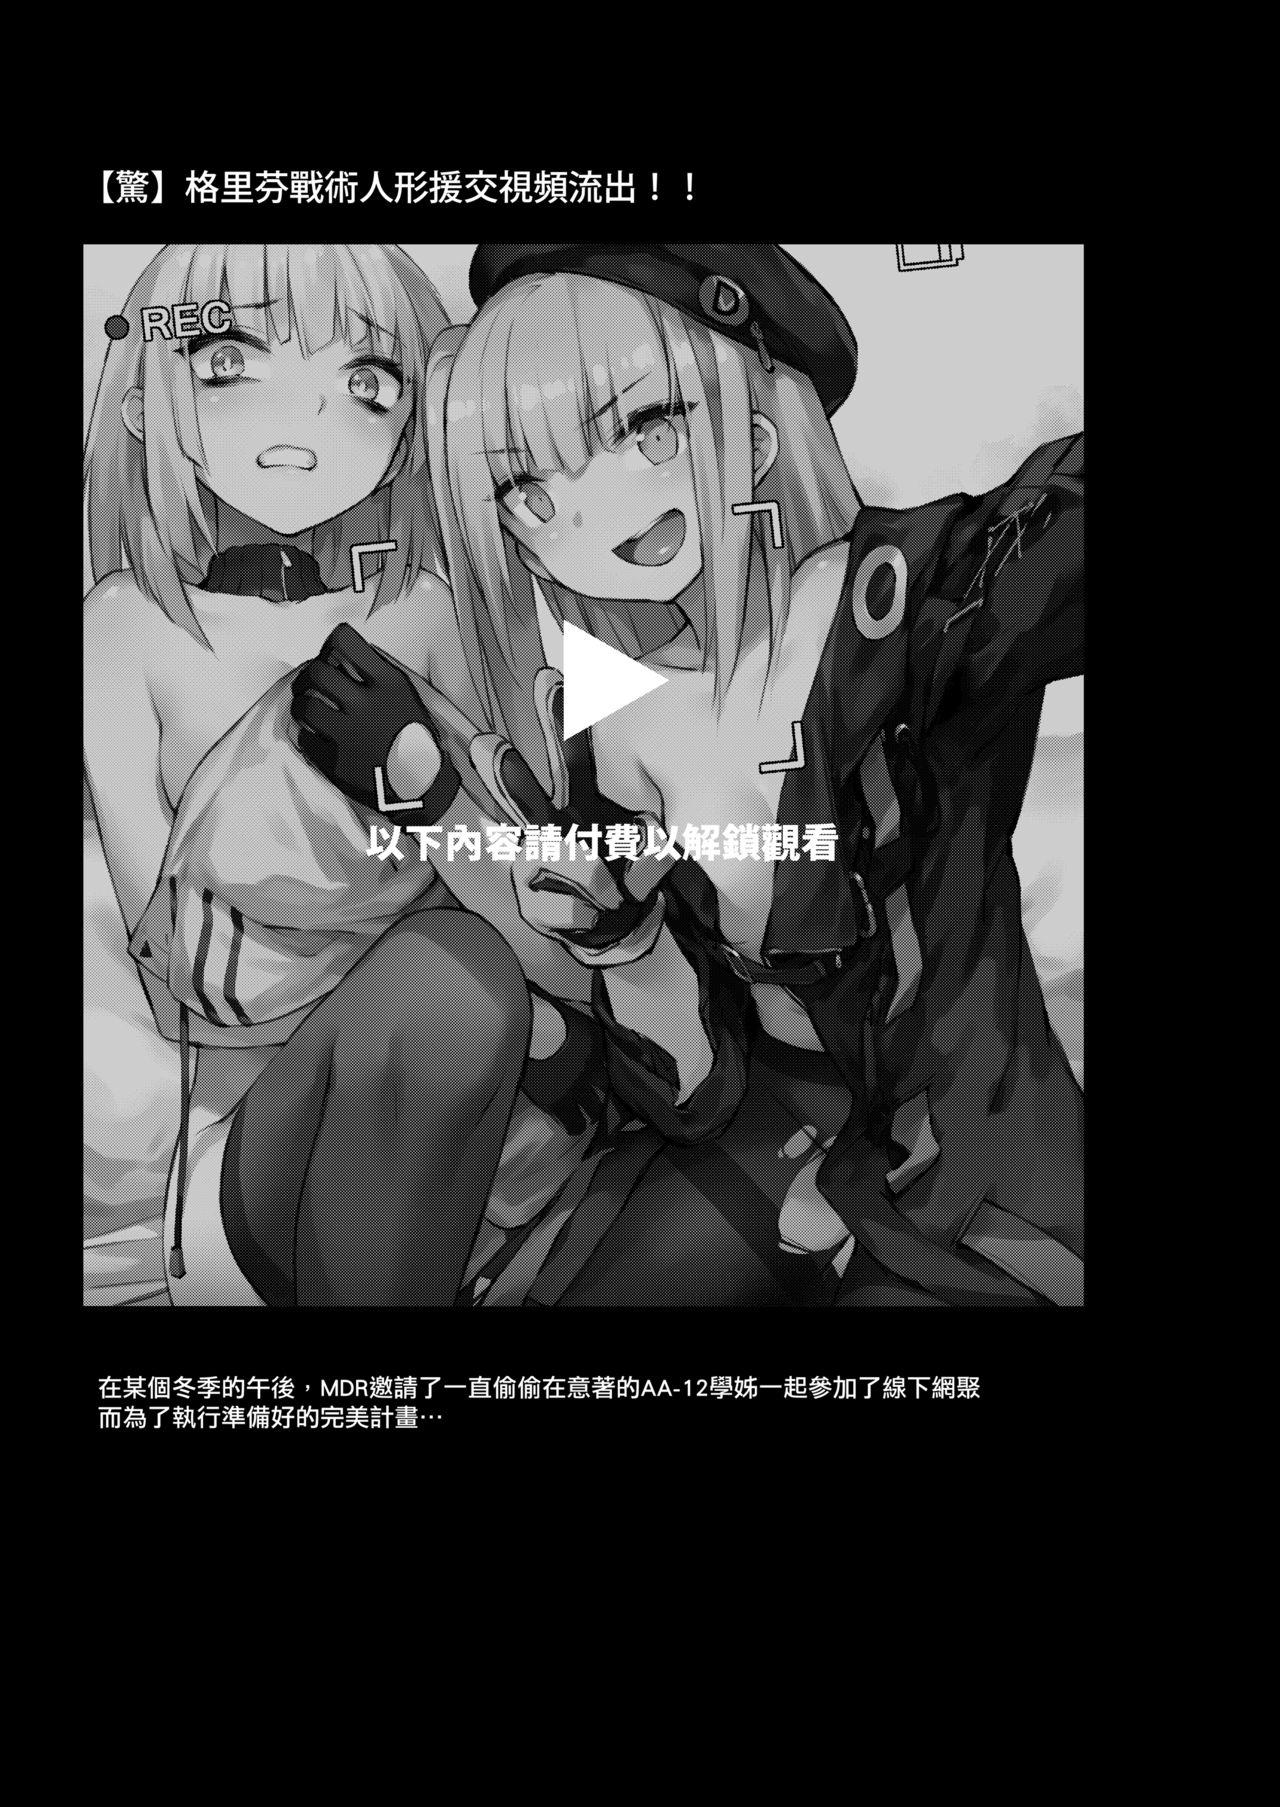 High Heels A Video of Griffin T-Dolls Having Sex For Money Just Leaked! - Girls frontline Salope - Page 2